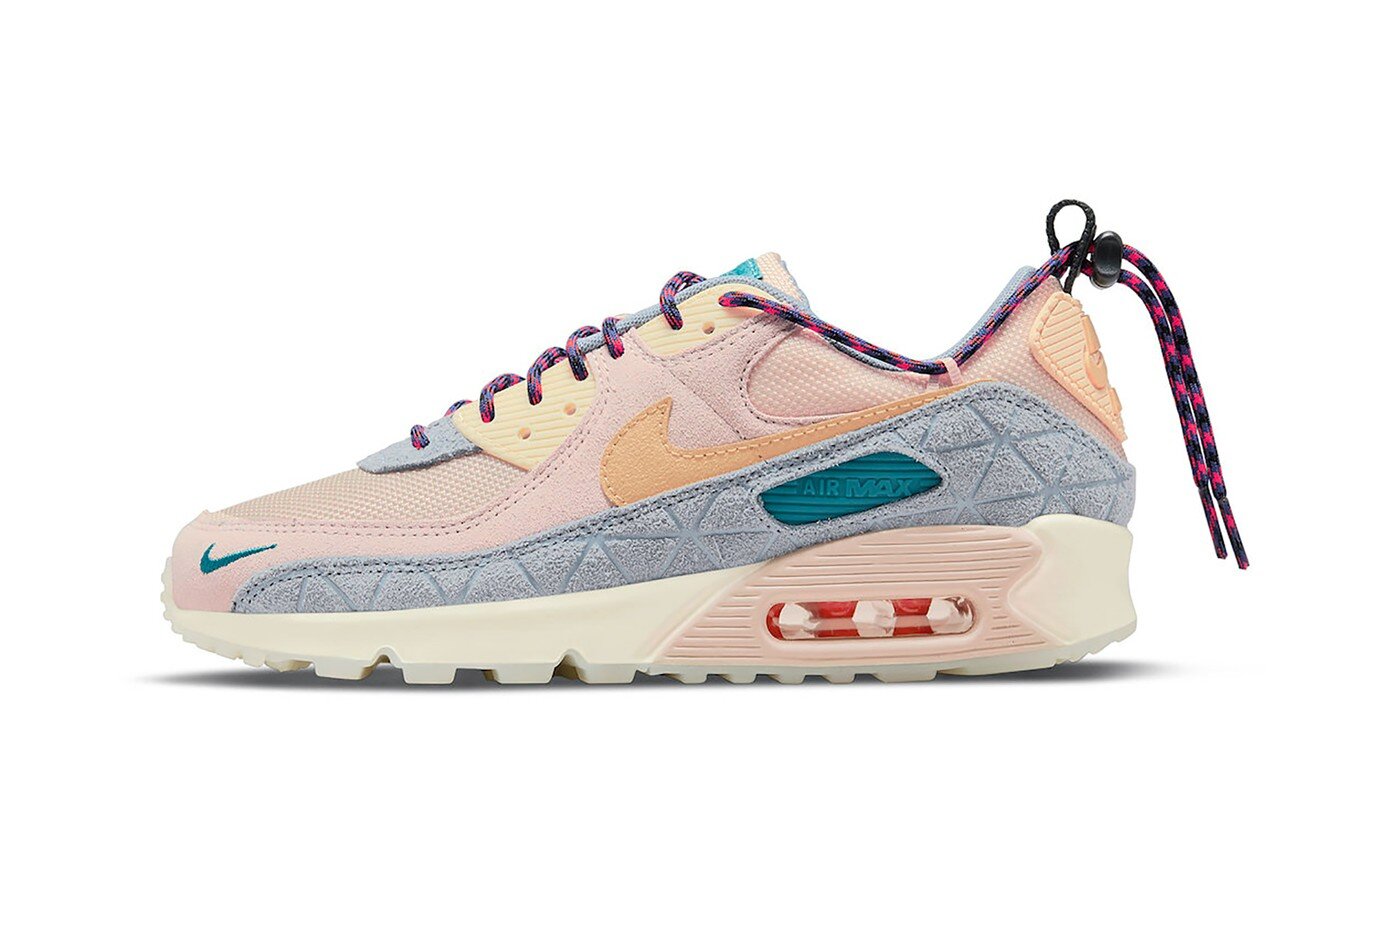 https---hypebeast.com-wp-content-blogs.dir-6-files-2021-07-nike-air-max-90-am90-womens-sneakers-fossil-stone-pastel-pink-blue-release-info-1.jpg